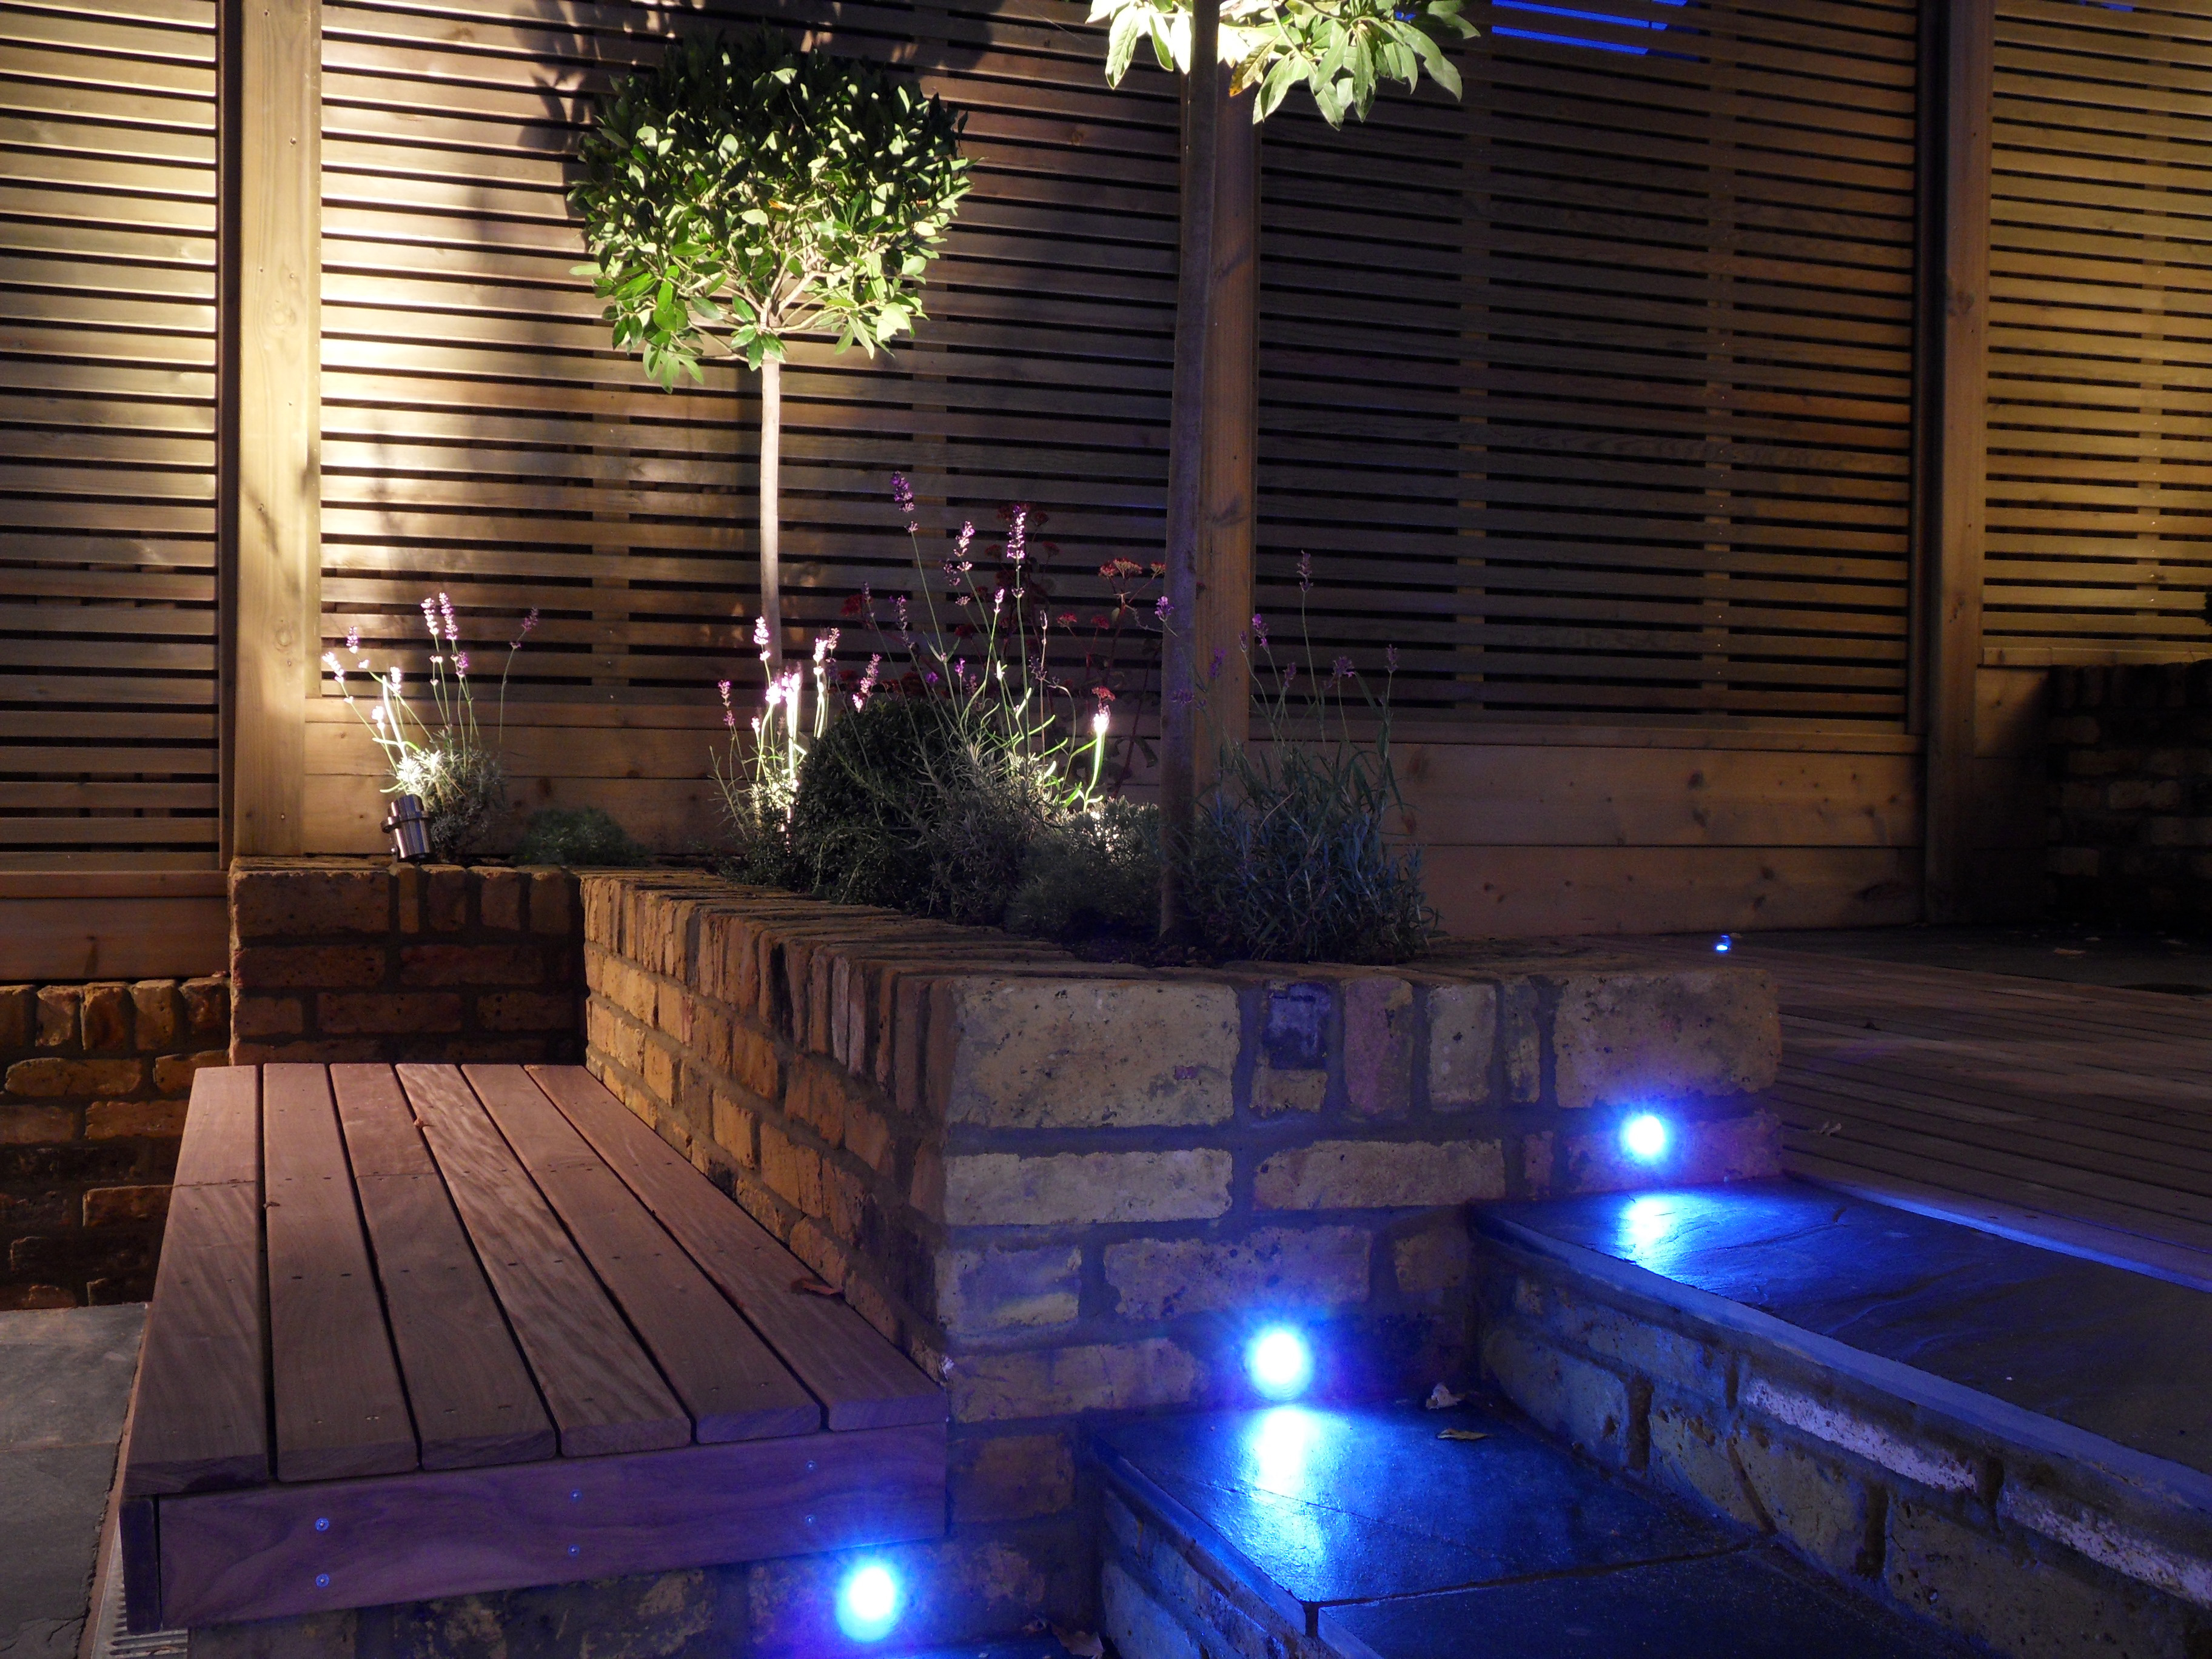 Garden lighting and electrical systems